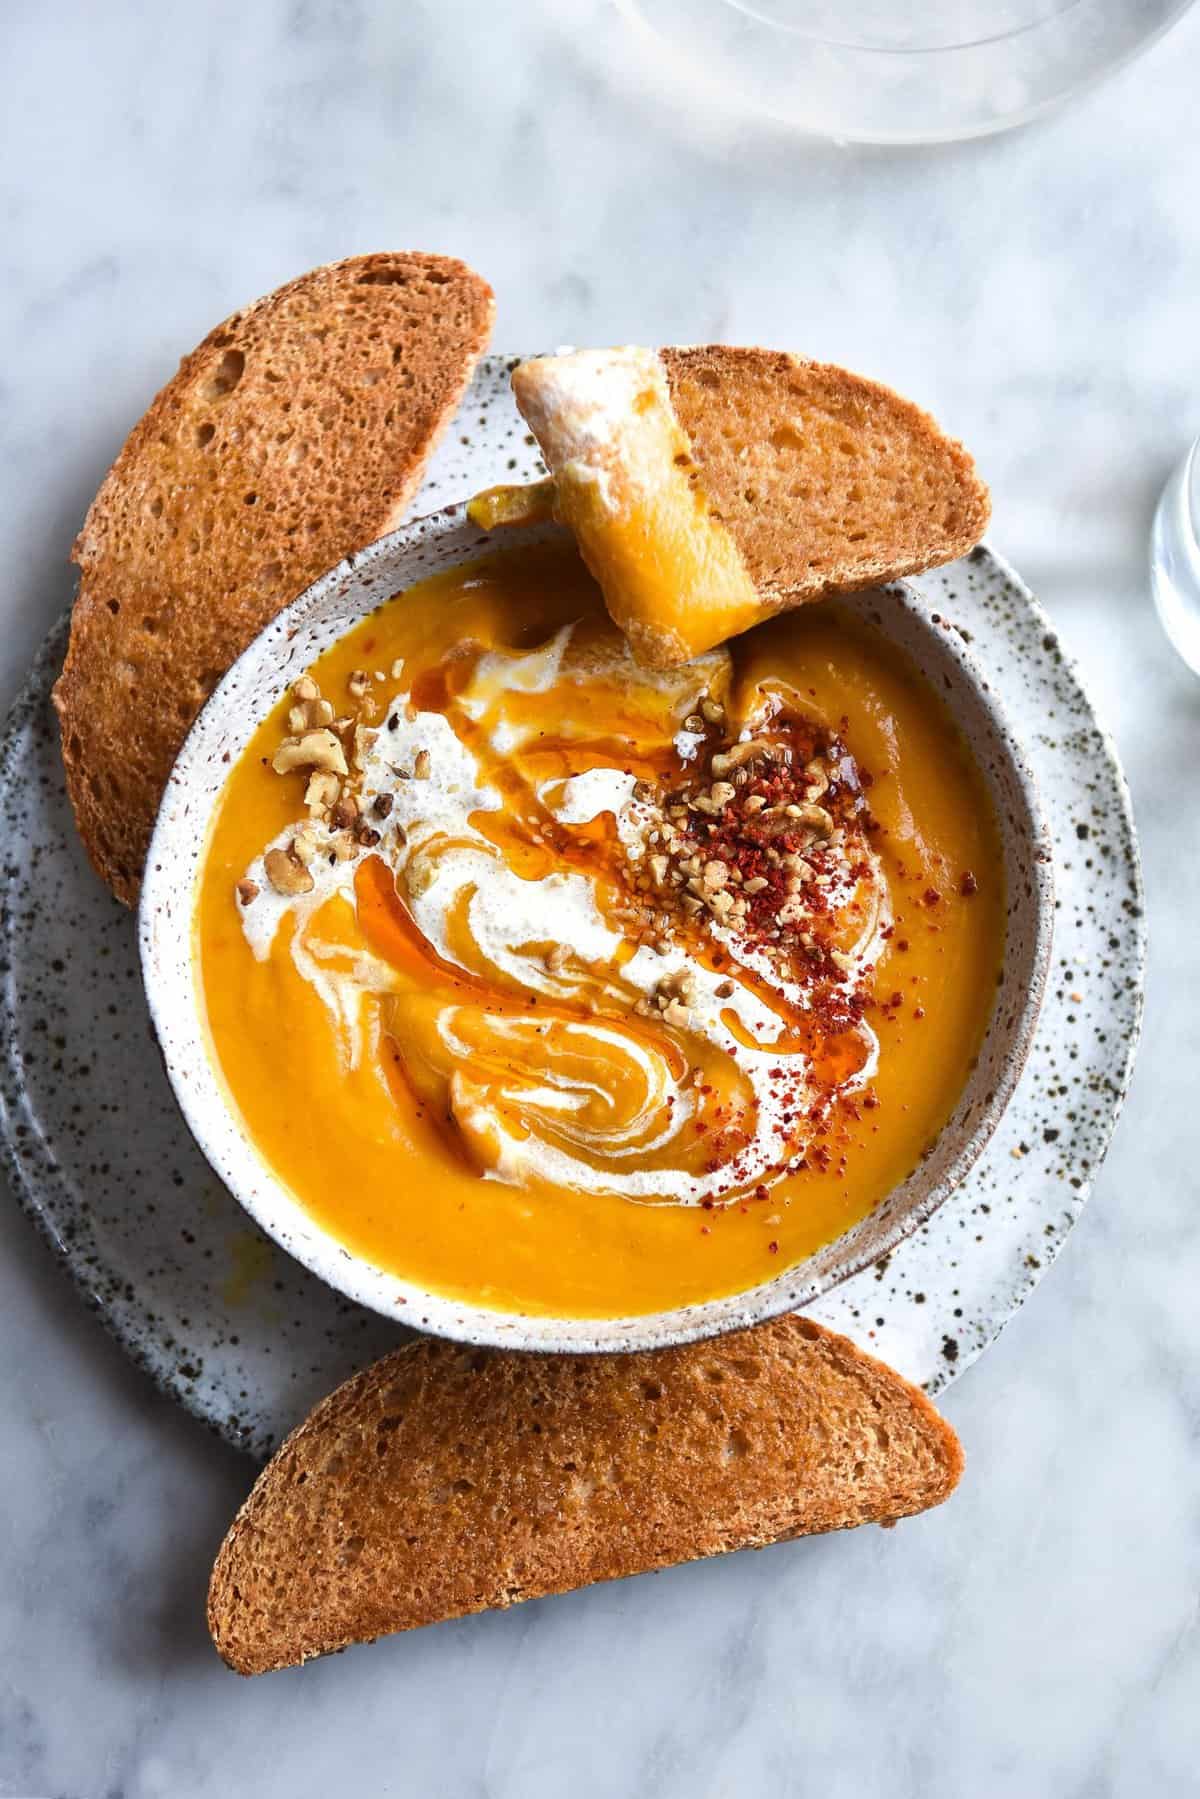 FODMAP friendly pumpkin soup that is incidentally vegan. With options for roasted or regular pumpkin soup, as well as a wealth of toppings and a side of gluten free sourdough bread. Recipe from www.georgeats.com